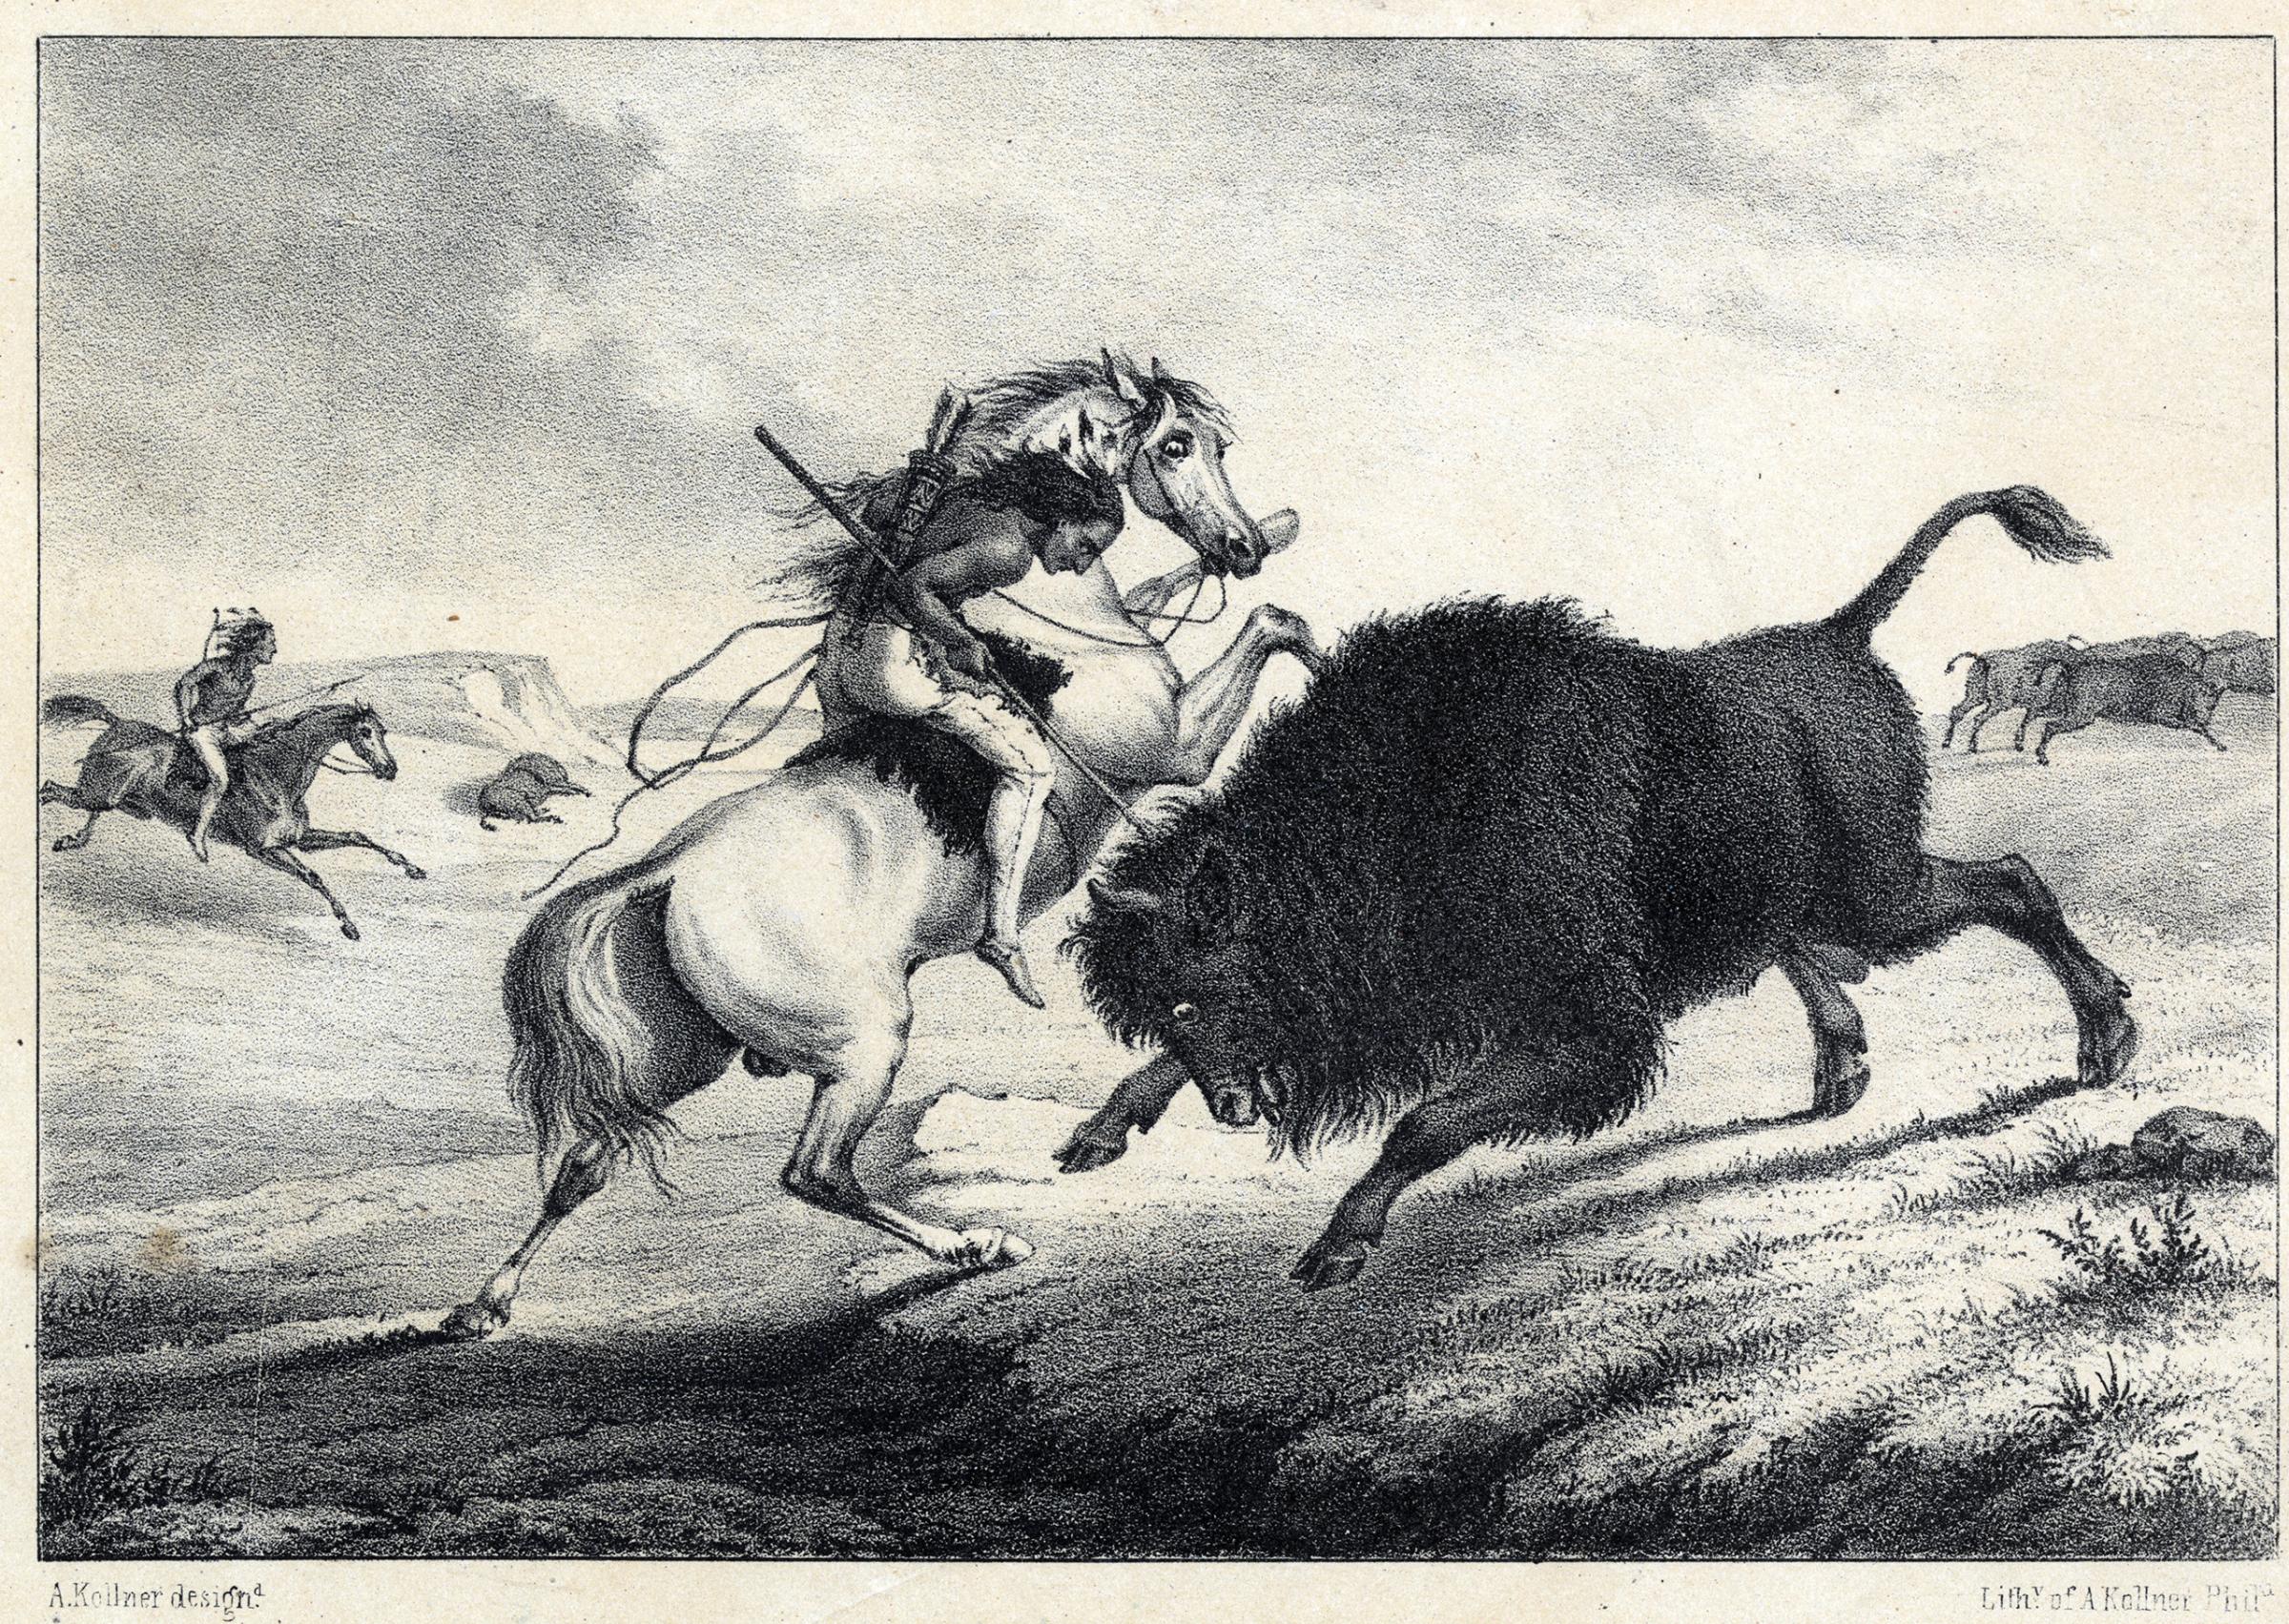 Lithograph of an American Indian on horseback killing a bison. Circa 1850-1860.